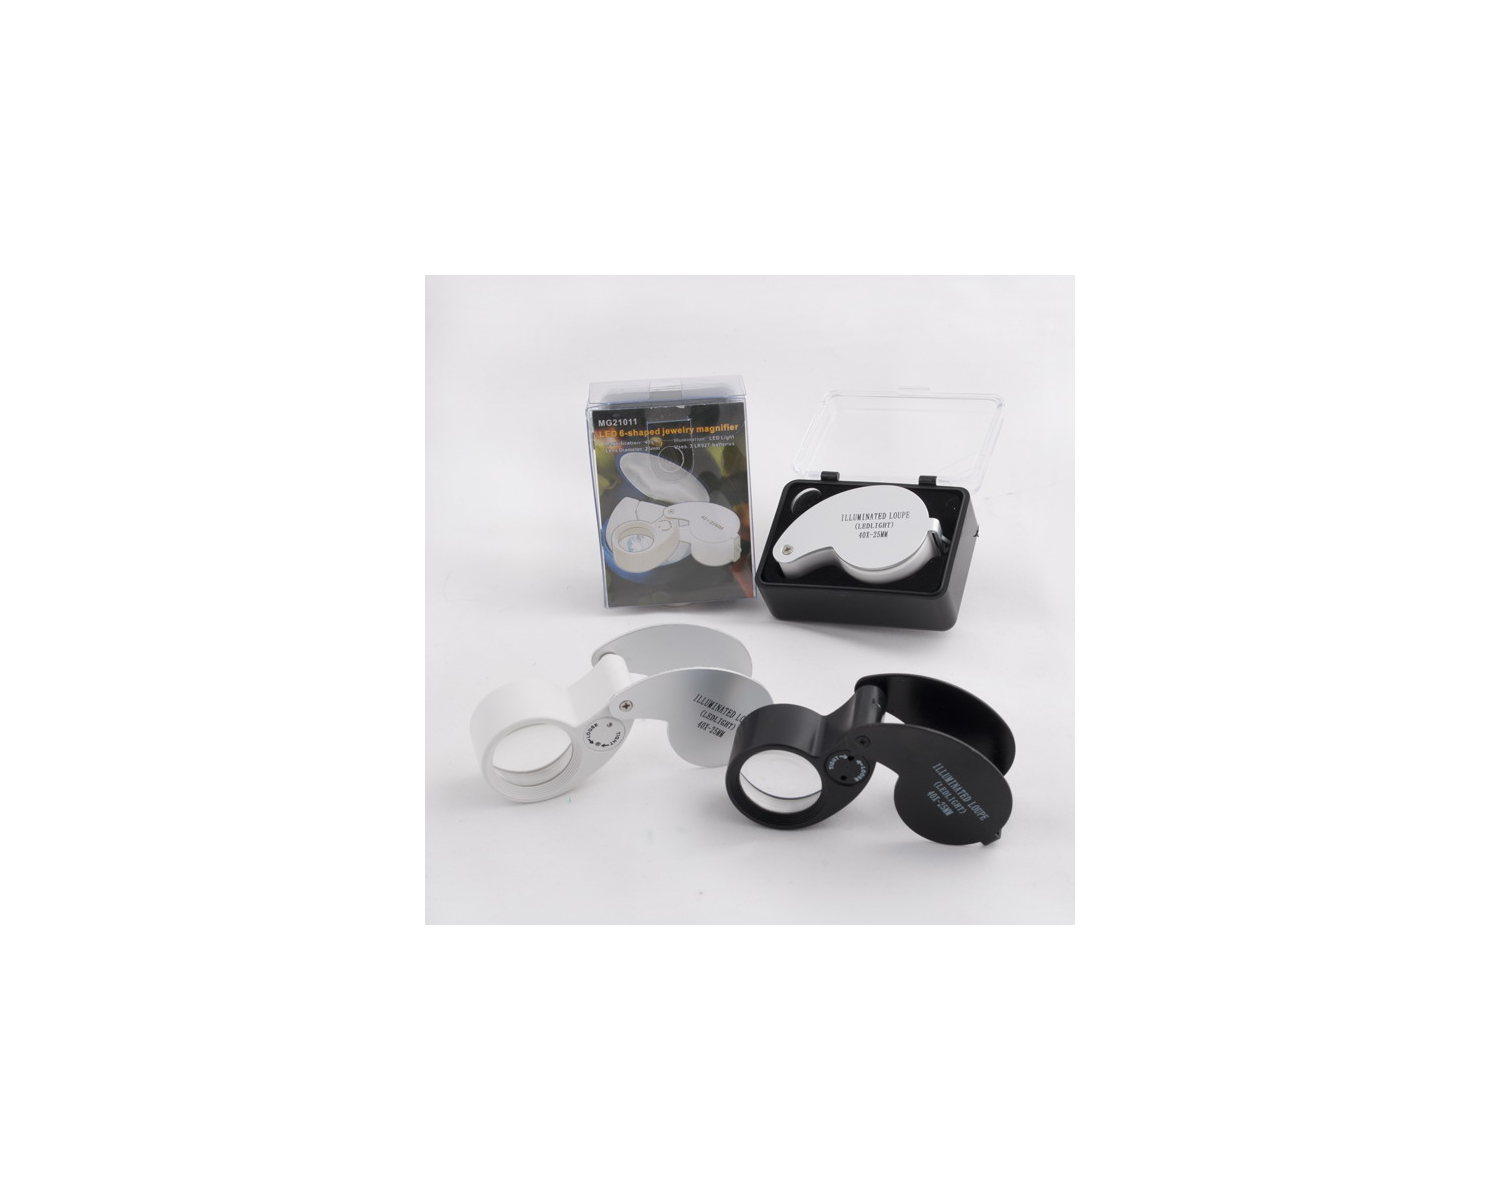 Multi-Purpose LED Eye Loupe with 40X Magnification and 25mm Lens Diameter